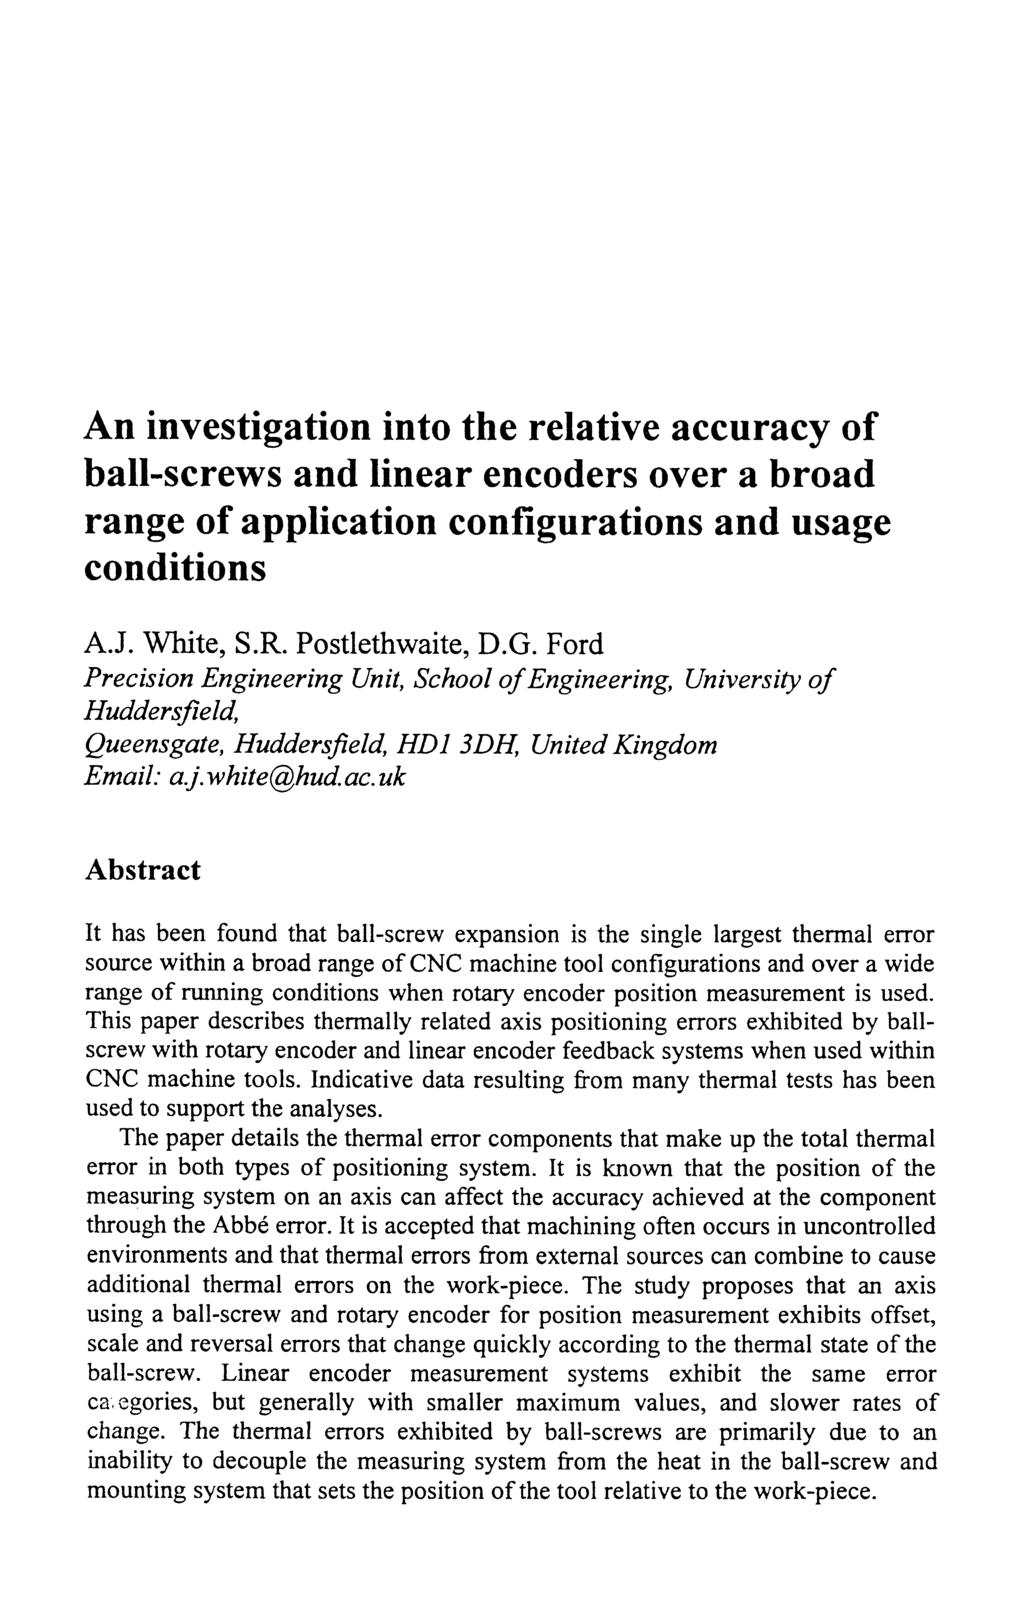 An investigation into the relative accuracy of ball-screws and linear encoders over a broad range of application configurations and usage conditions A.J. White, S.R. Postlethwaite, D.G.